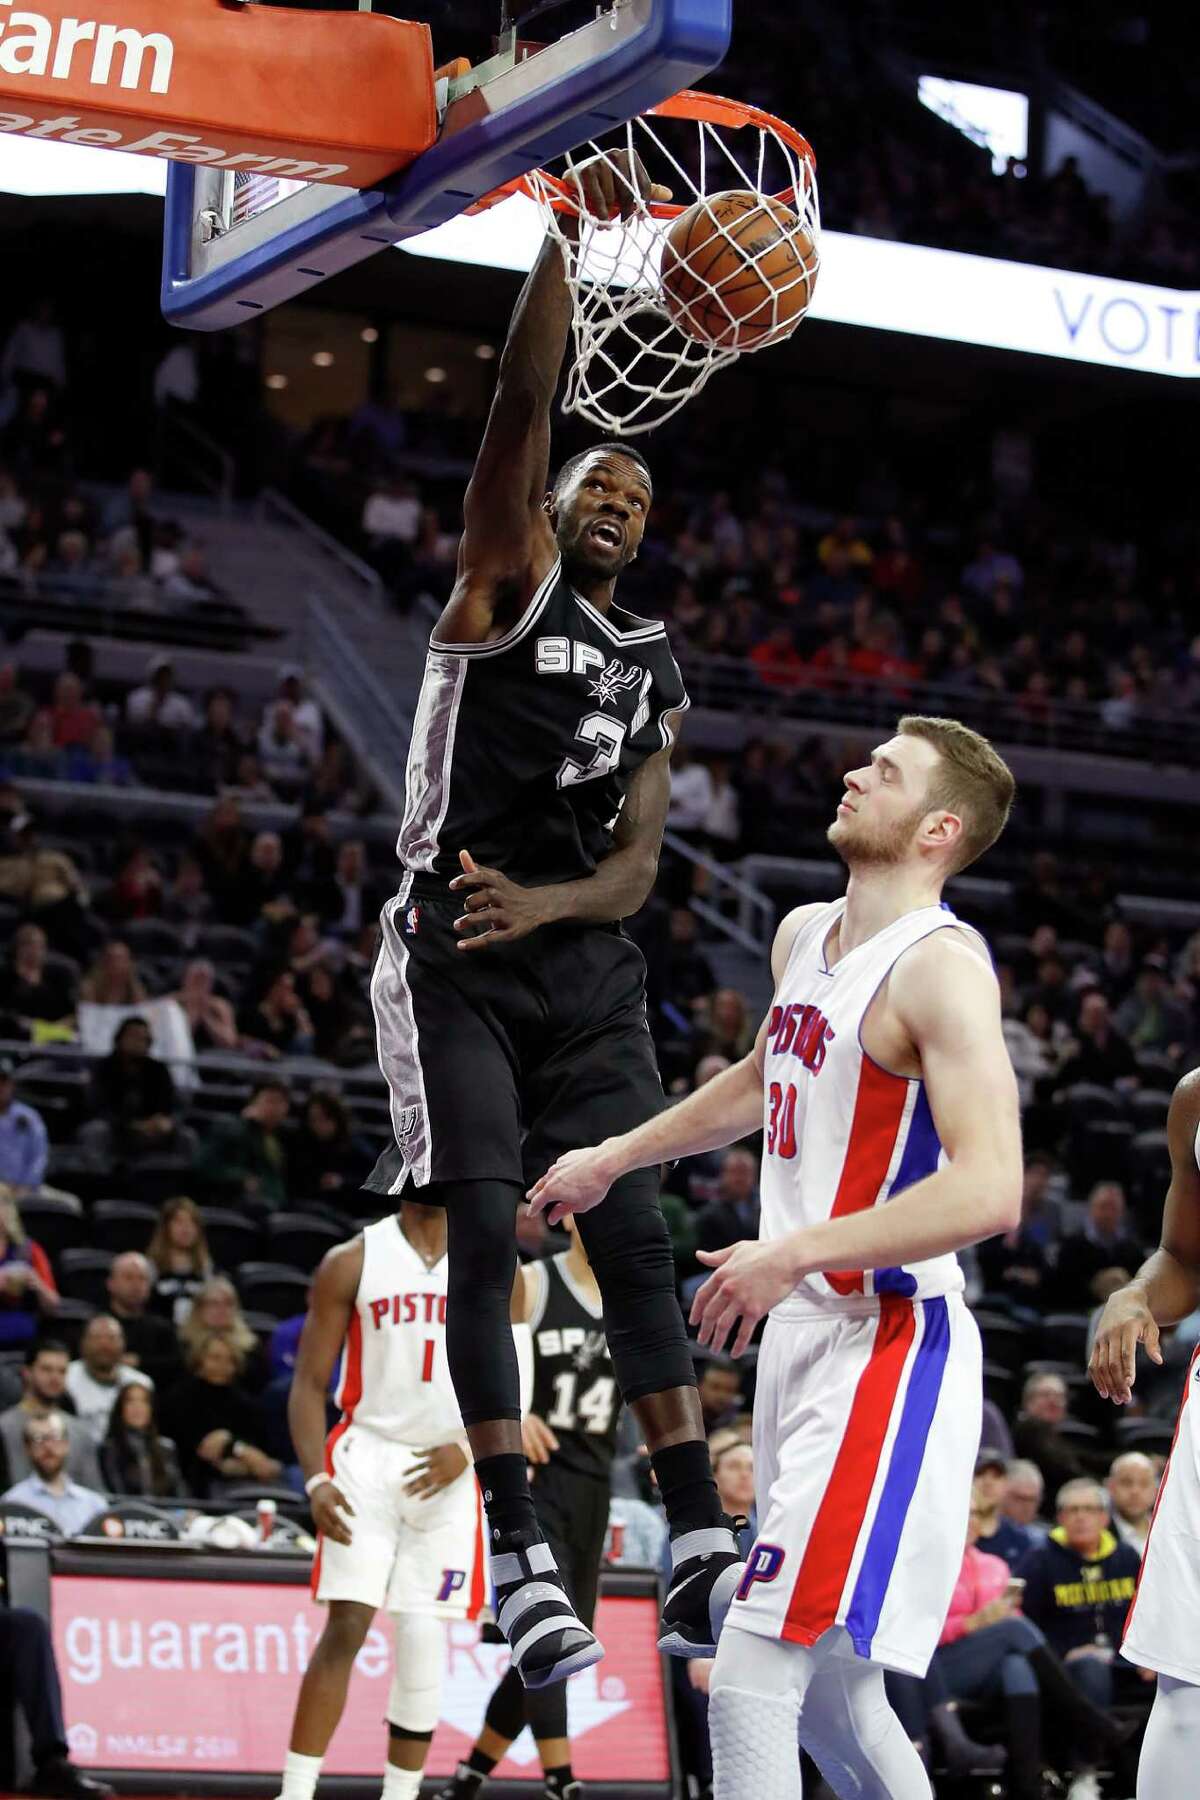 AUBURN HILLS, MI - FEBRUARY 10: Dewayne Dedmon #3 of the San Antonio Spurs dunks next to Jon Leuer #30 of the Detroit Pistons during the second half at the Palace of Auburn Hills on February 10, 2017 in Auburn Hills, Michigan. San Antonio won the game 103-92. NOTE TO USER: User expressly acknowledges and agrees that, by downloading and or using this photograph, User is consenting to the terms and conditions of the Getty Images License Agreement.